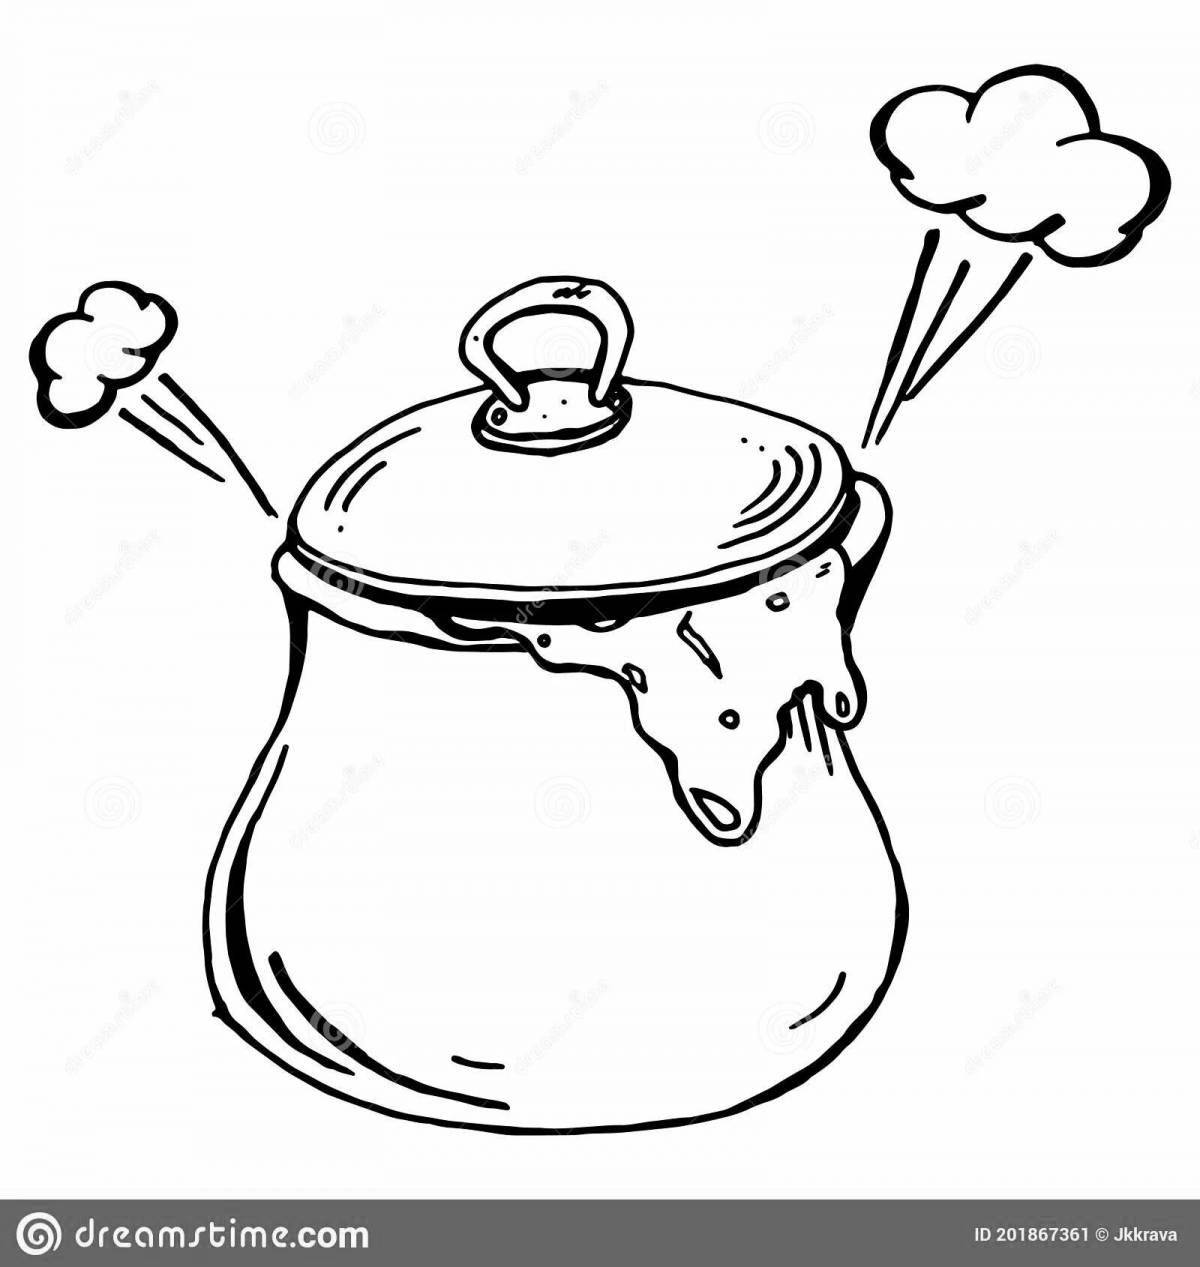 Adorable saucepan coloring book for 3-4 year olds